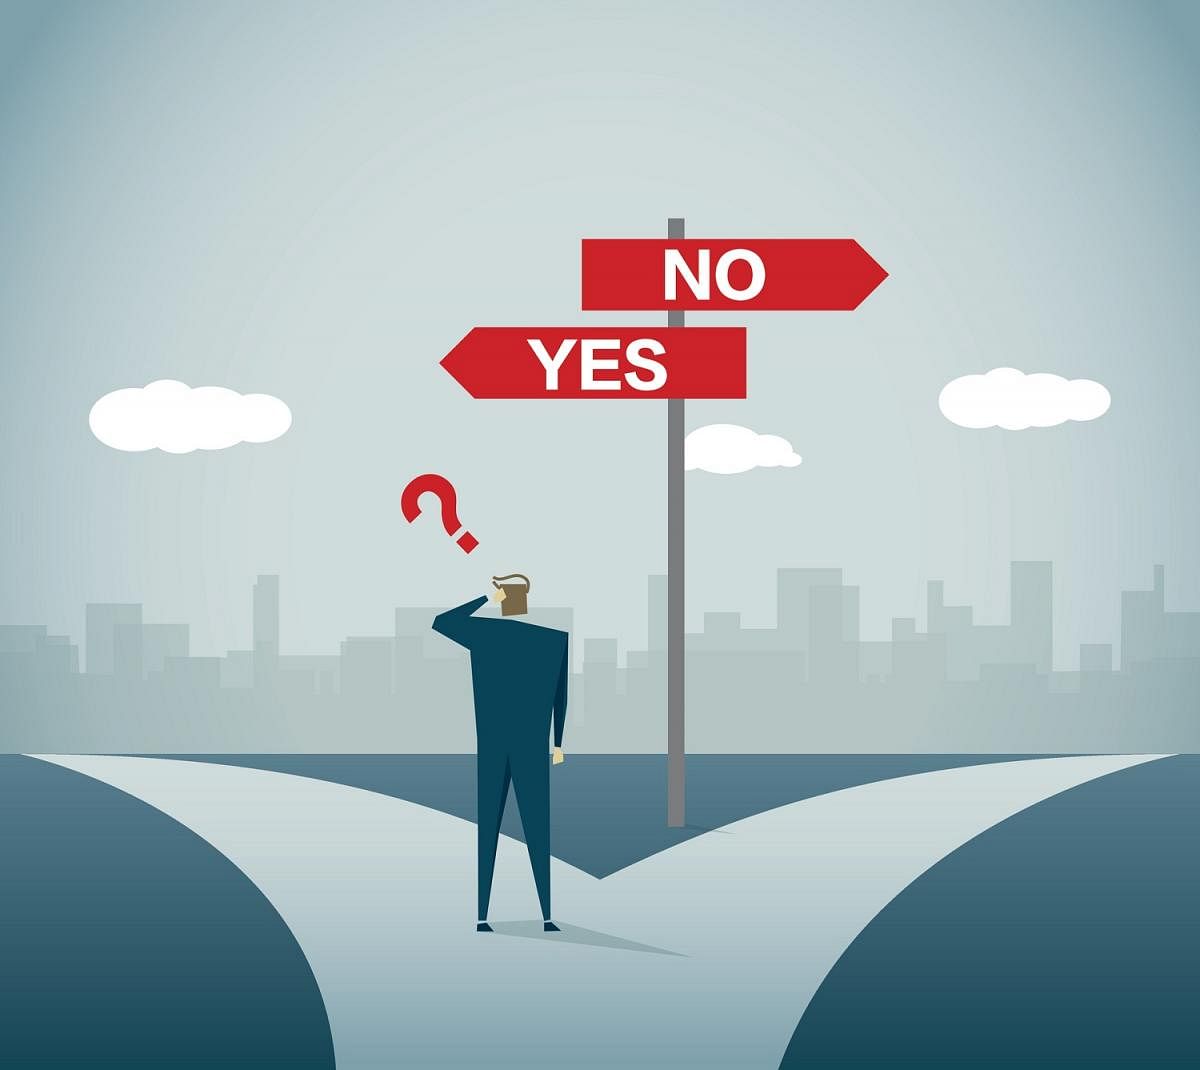 Saying ‘yes’ when you really want to say ‘no’ is not always about being kind